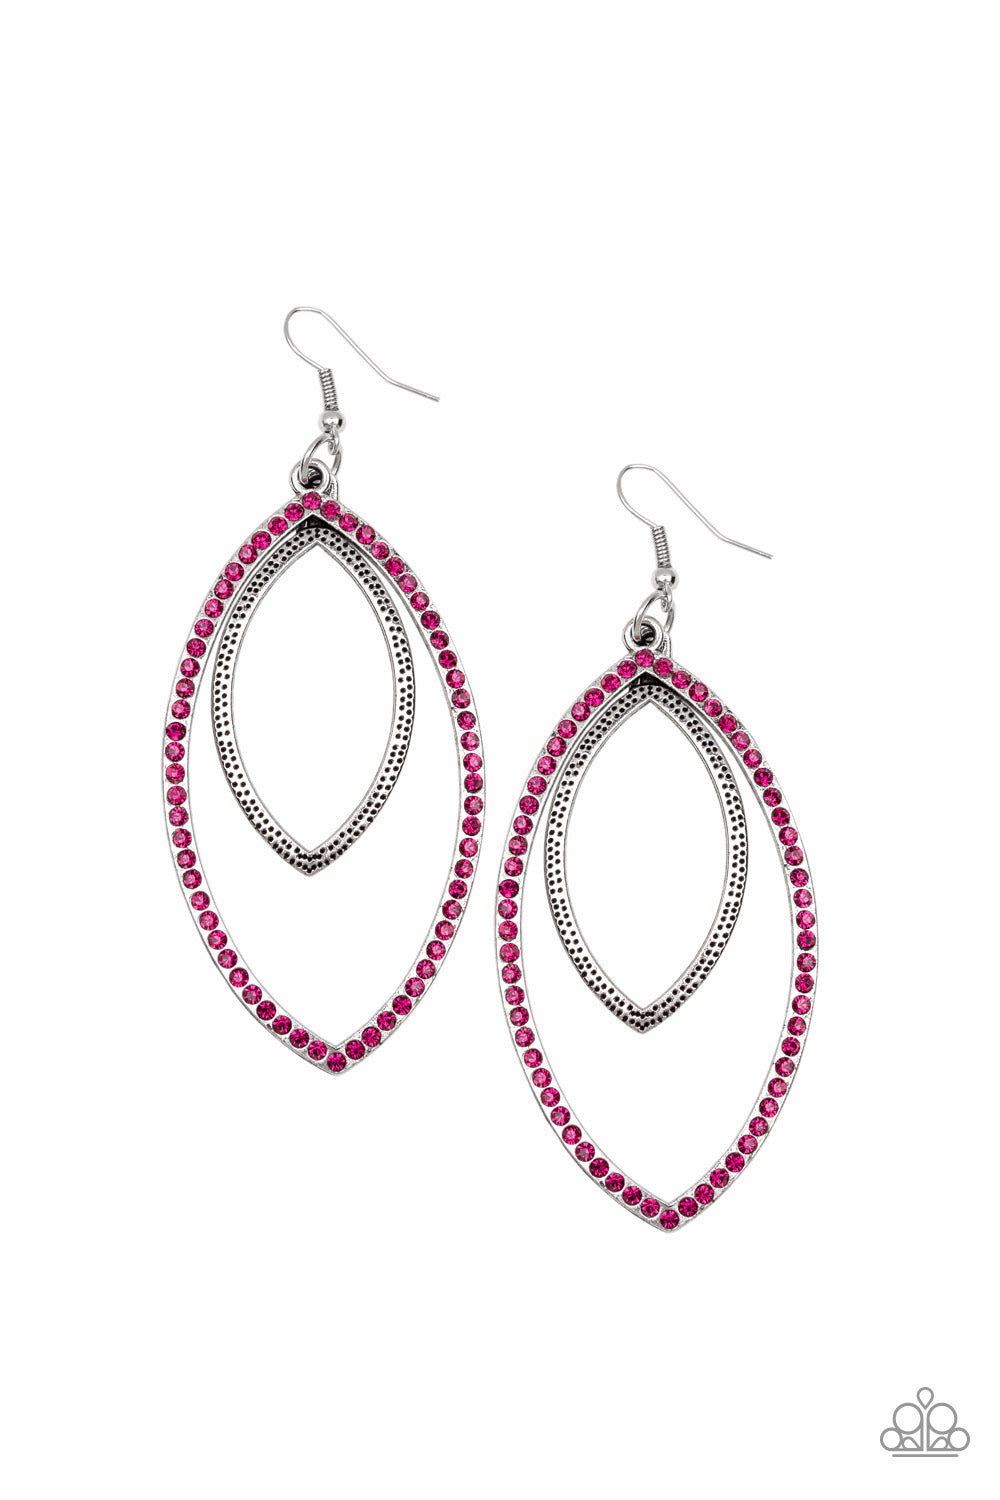 Paparazzi Accessories High Maintenance - Pink Earrings - Lady T Accessories